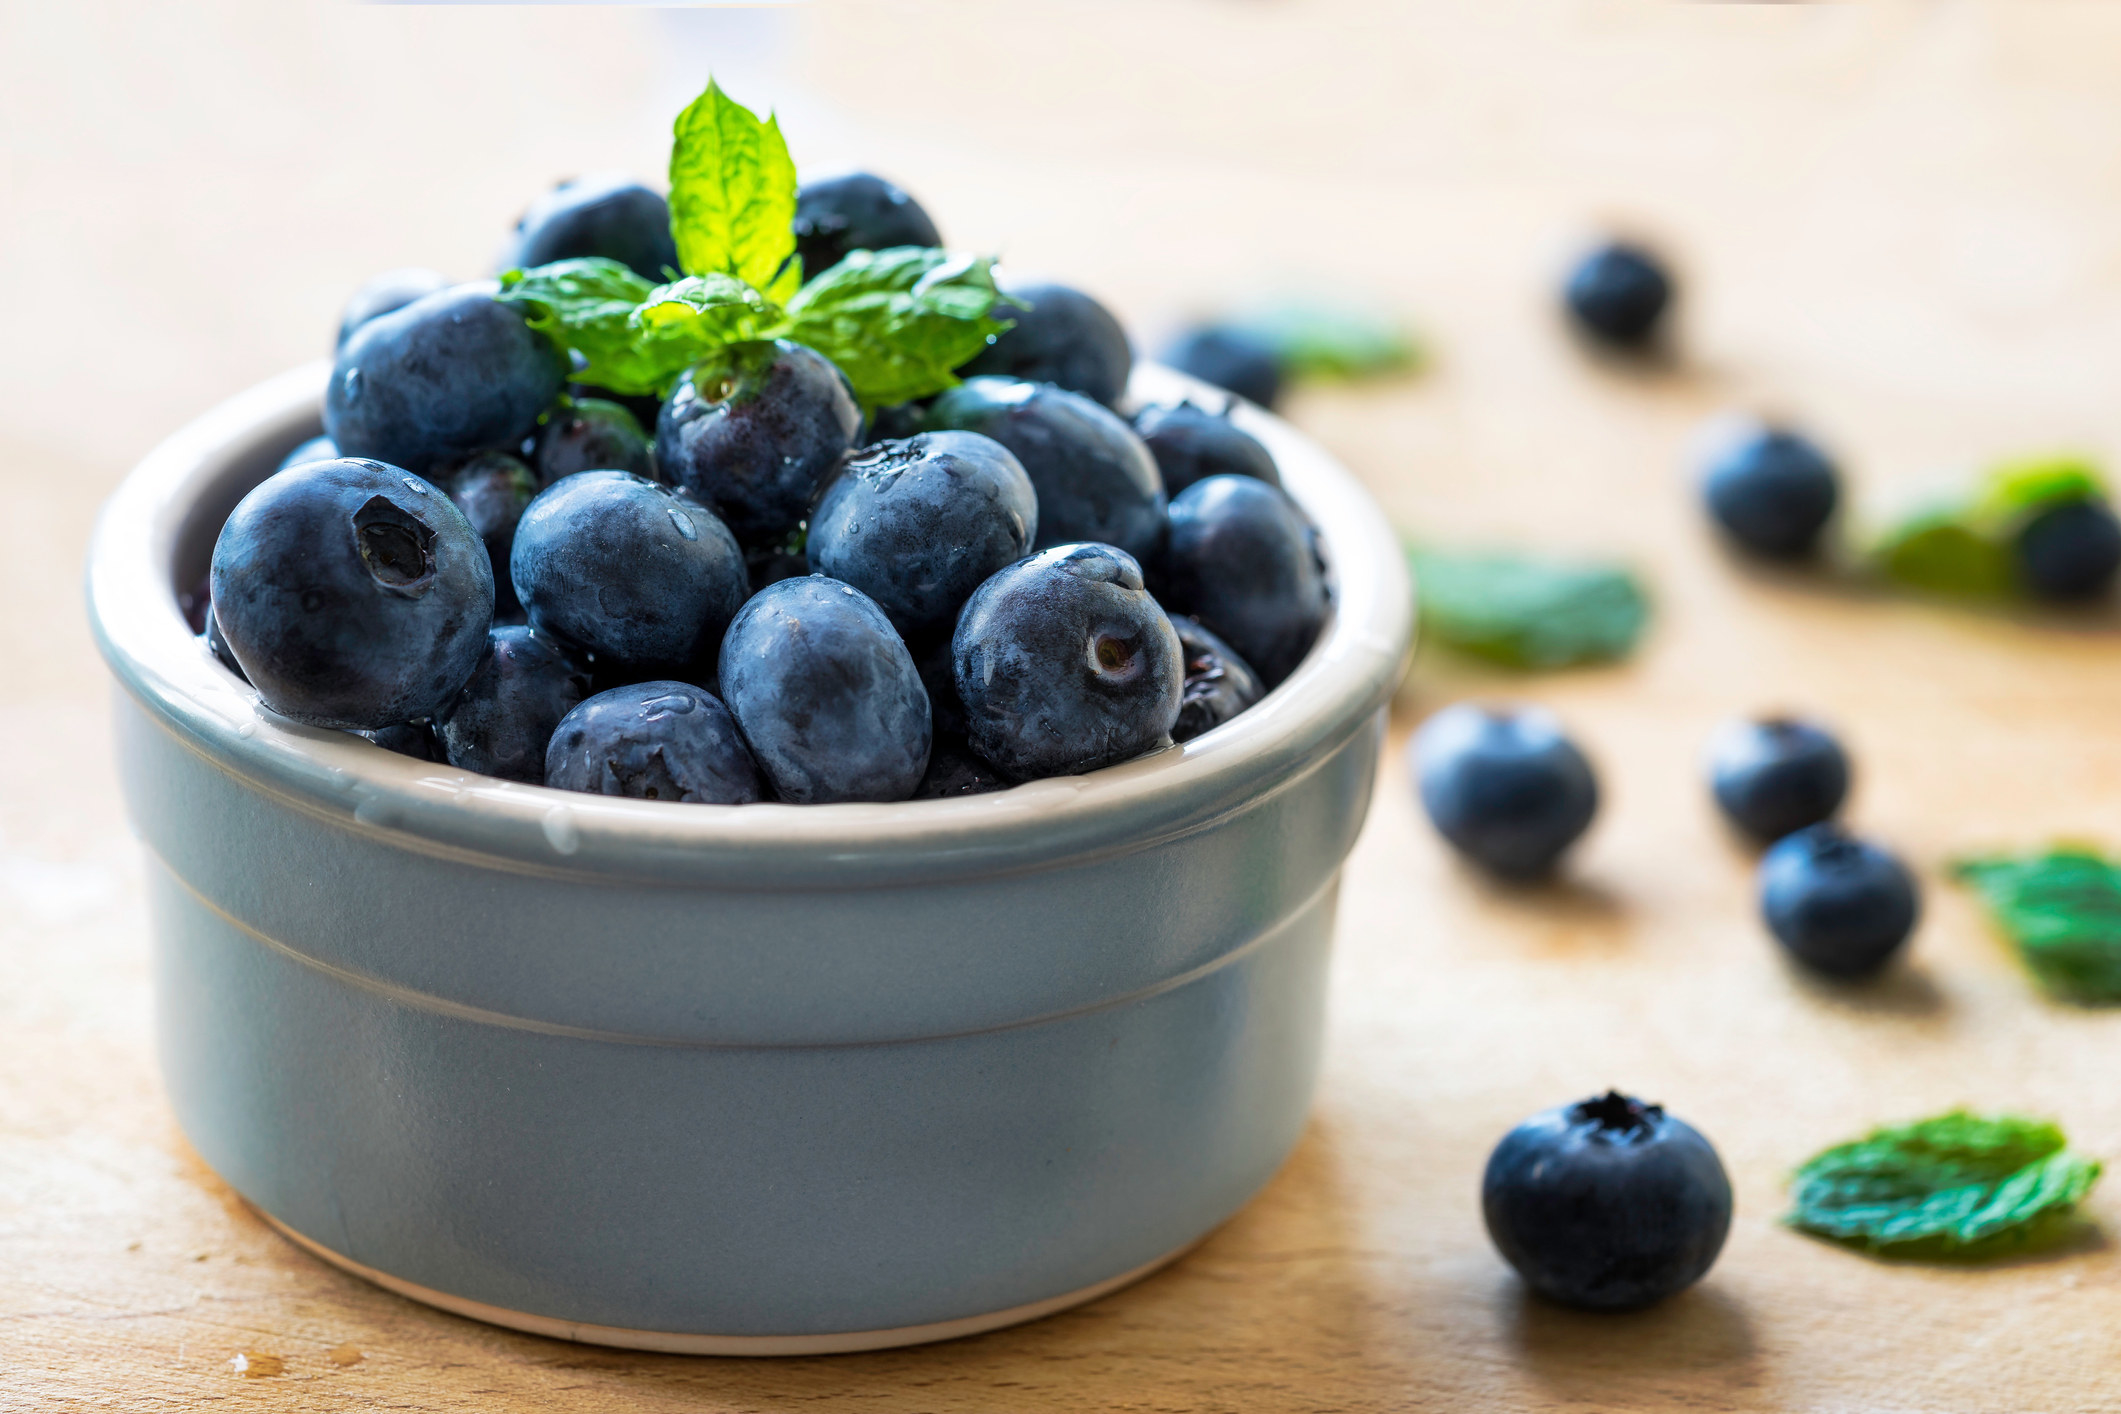 A bowl holding blueberries, with other blueberries lying on the table around the bowl